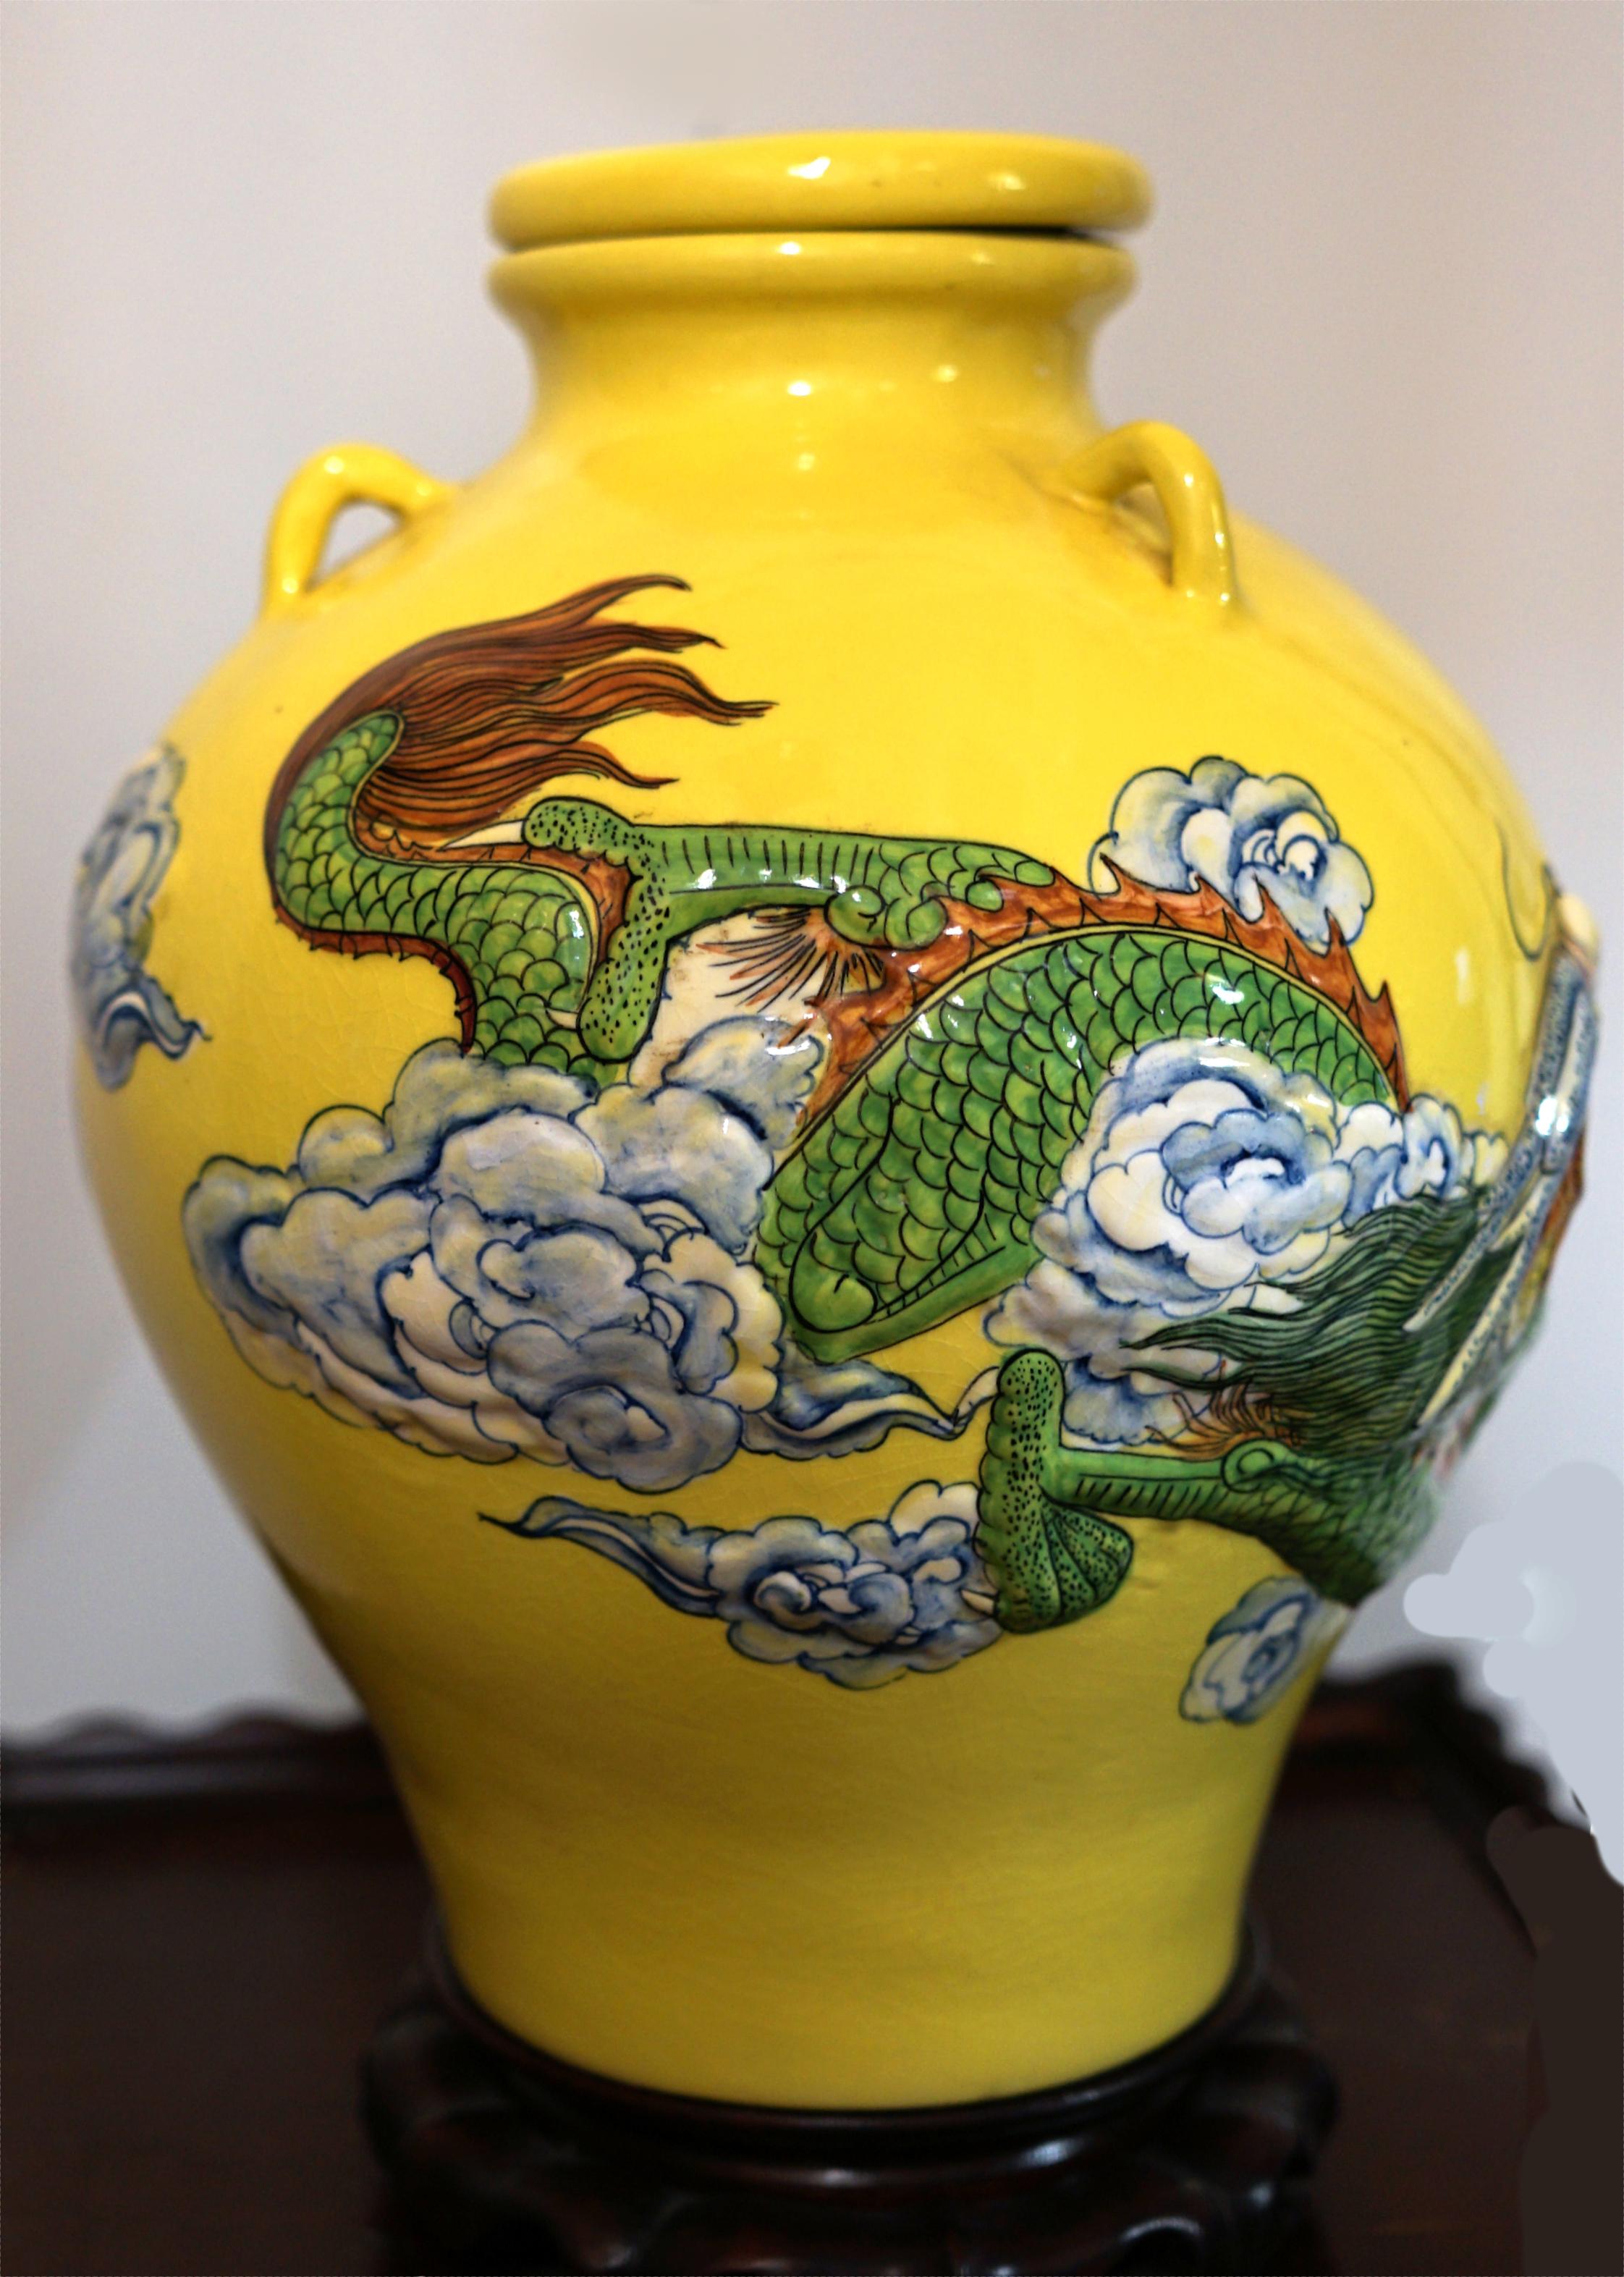 Few scenes are as compelling as a dragon aloft in high relief as it moves through clouds and the atmosphere of a glazed enamel background in yellow.
The Yellow Ceramic Jar adorned with a top and high-relief design features a majestic dragon,